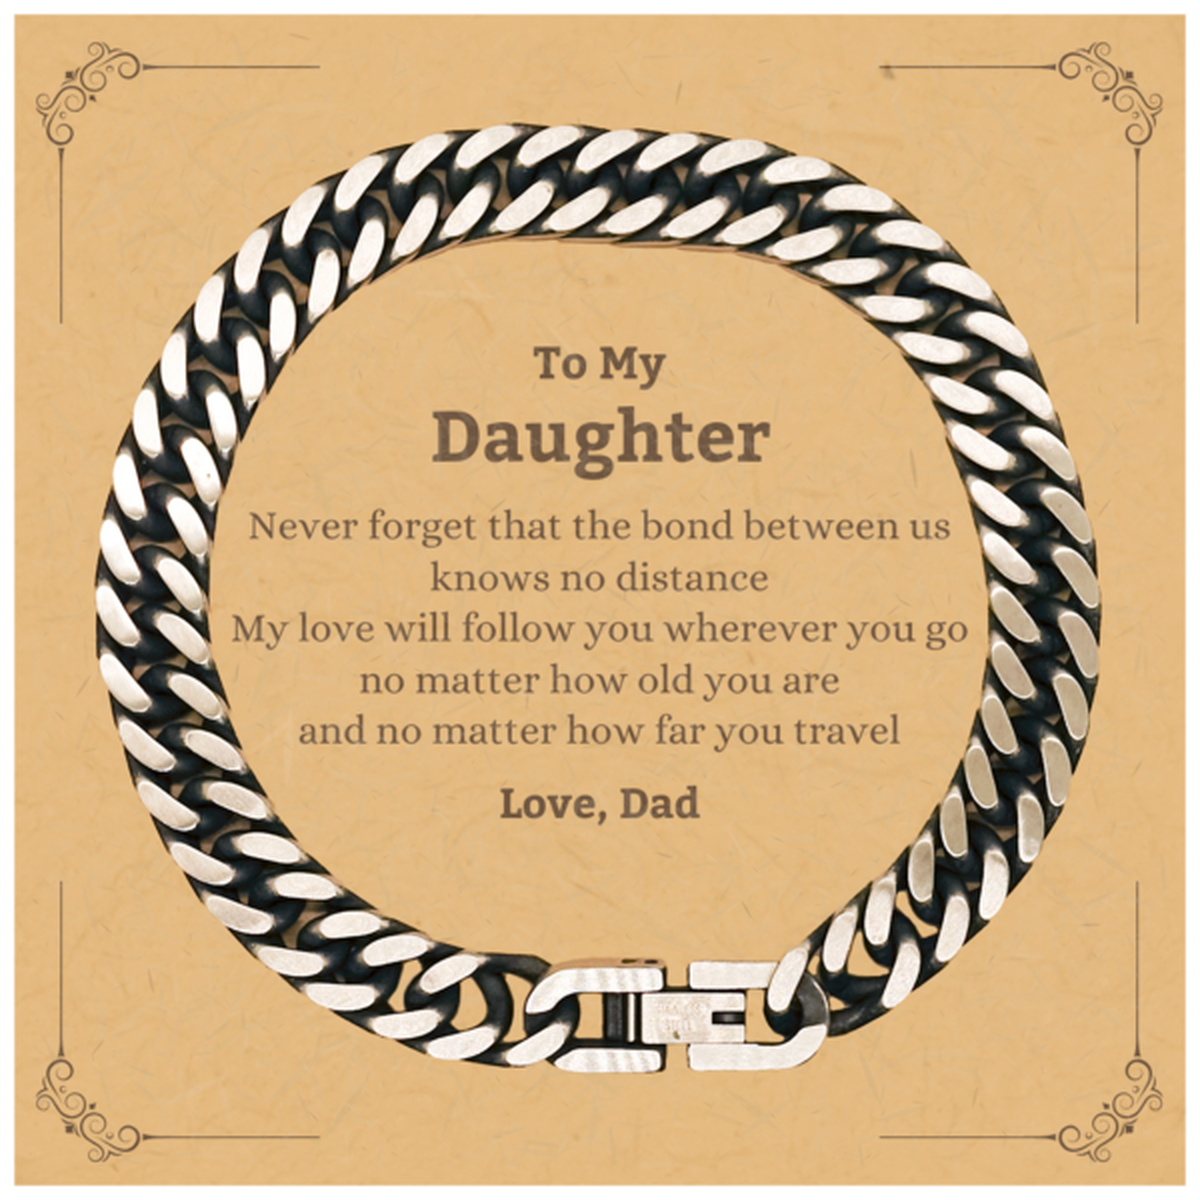 Daughter Birthday Gifts from Dad, Adjustable Cuban Link Chain Bracelet for Daughter Christmas Graduation Unique Gifts Daughter Never forget that the bond between us knows no distance. Love, Dad